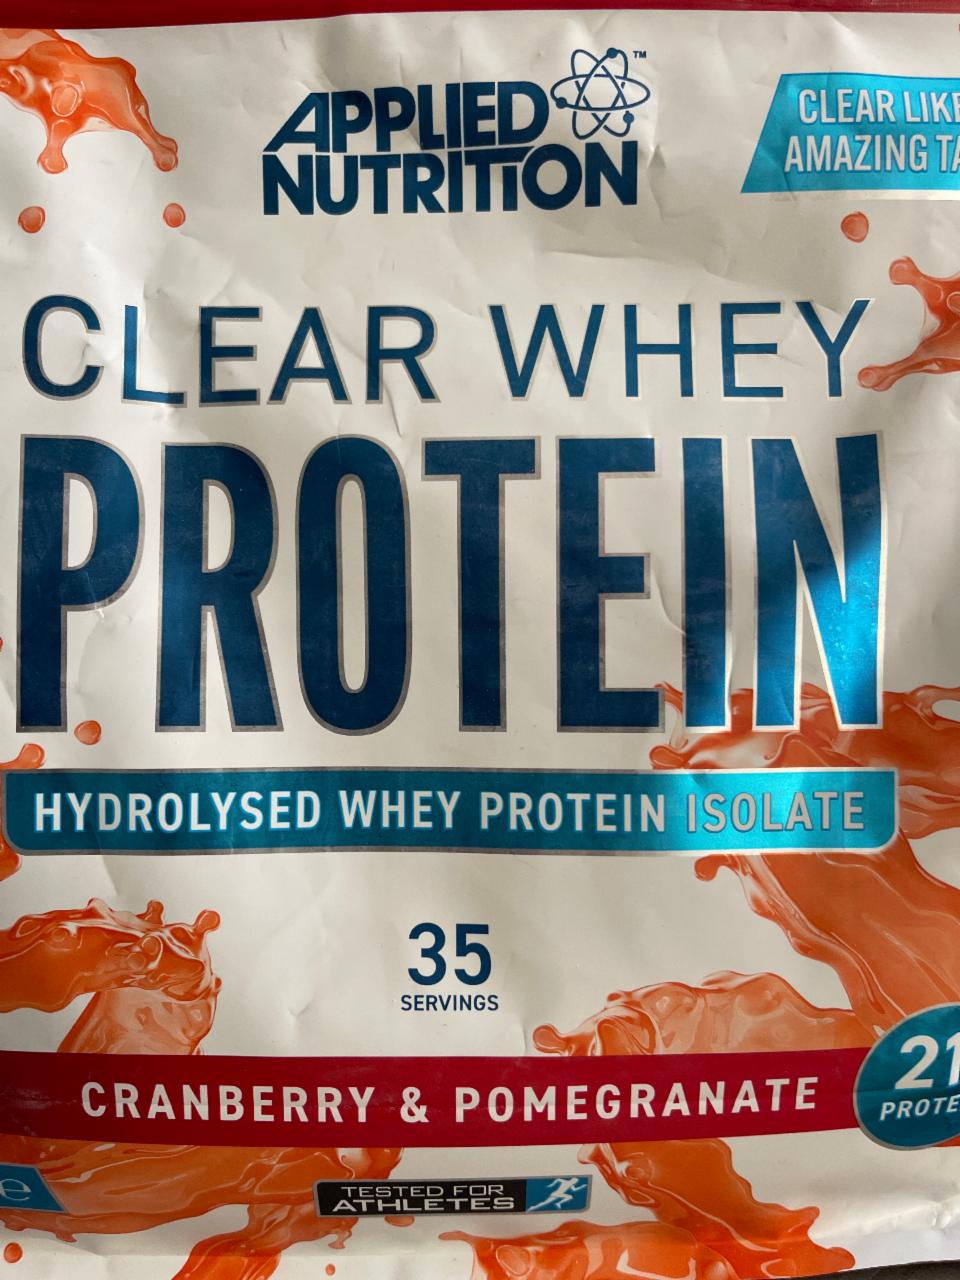 Fotografie - Clear Whey Protein Cranberry & Pomegranate Applied Nutrition